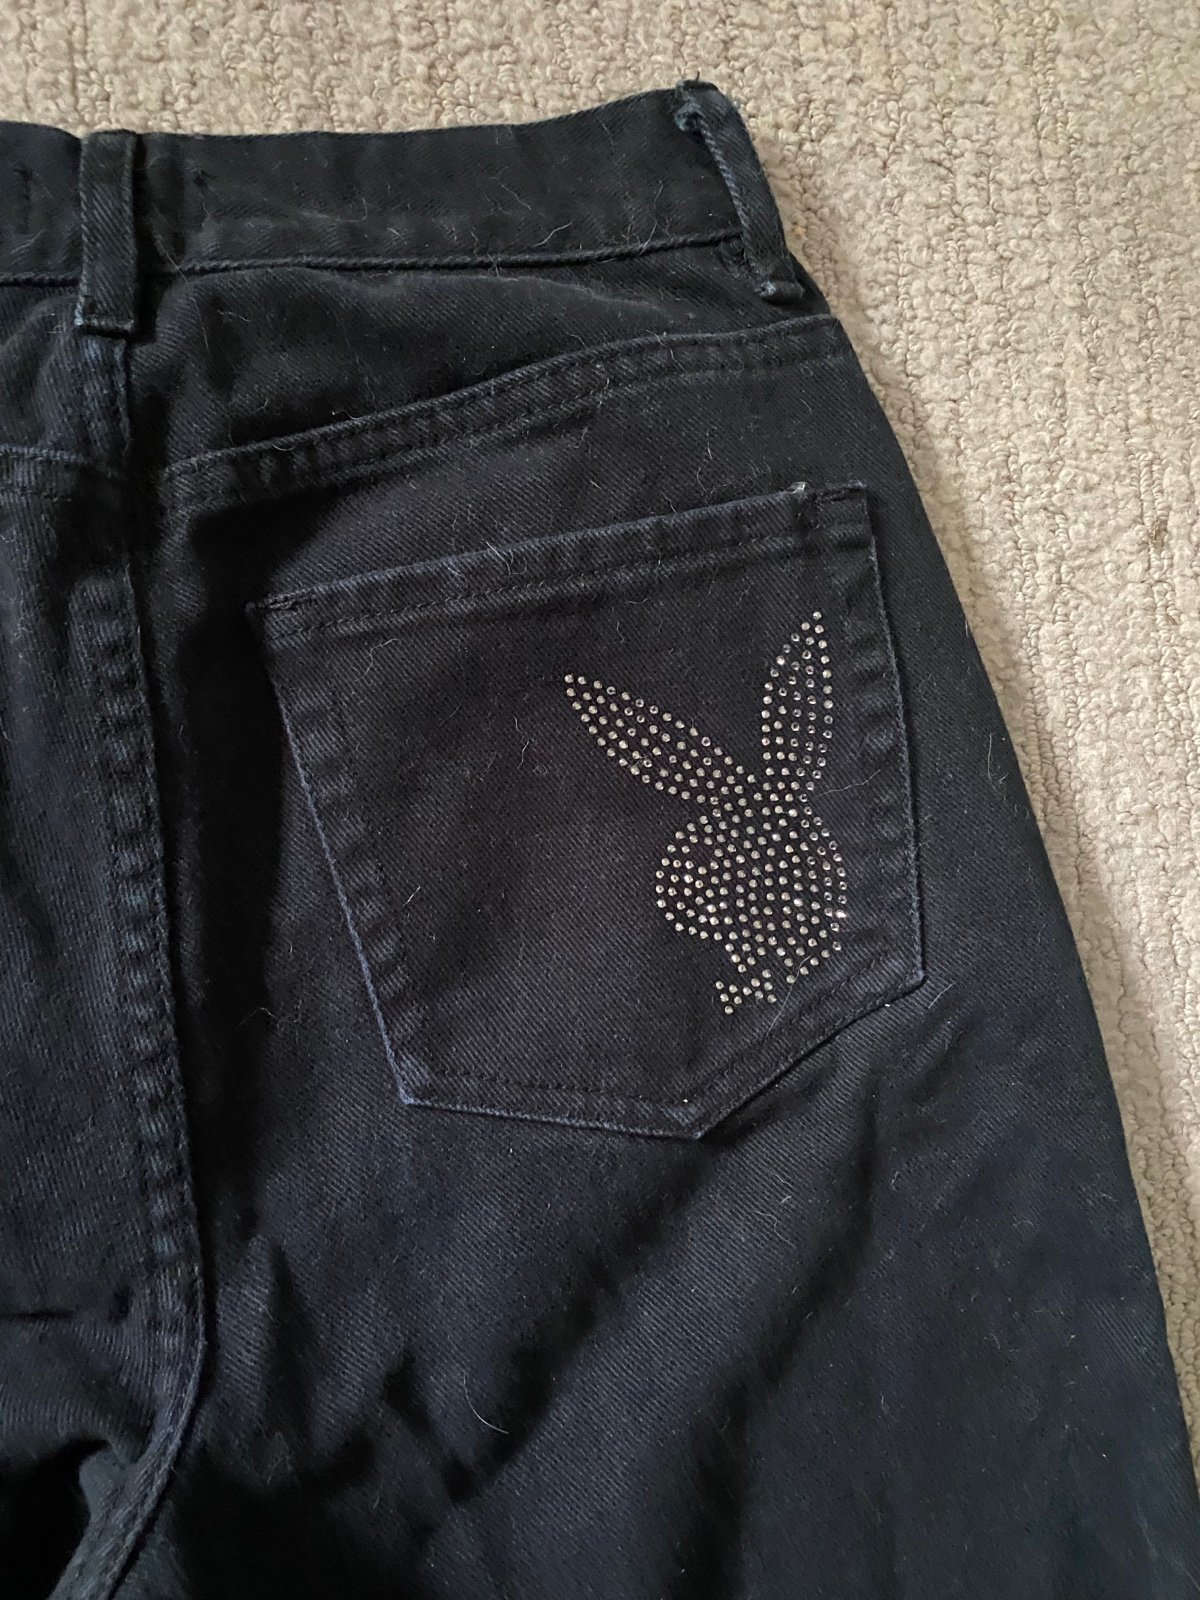 Fashion playboy PacSun jeans HCWuGr20Y US Outlet